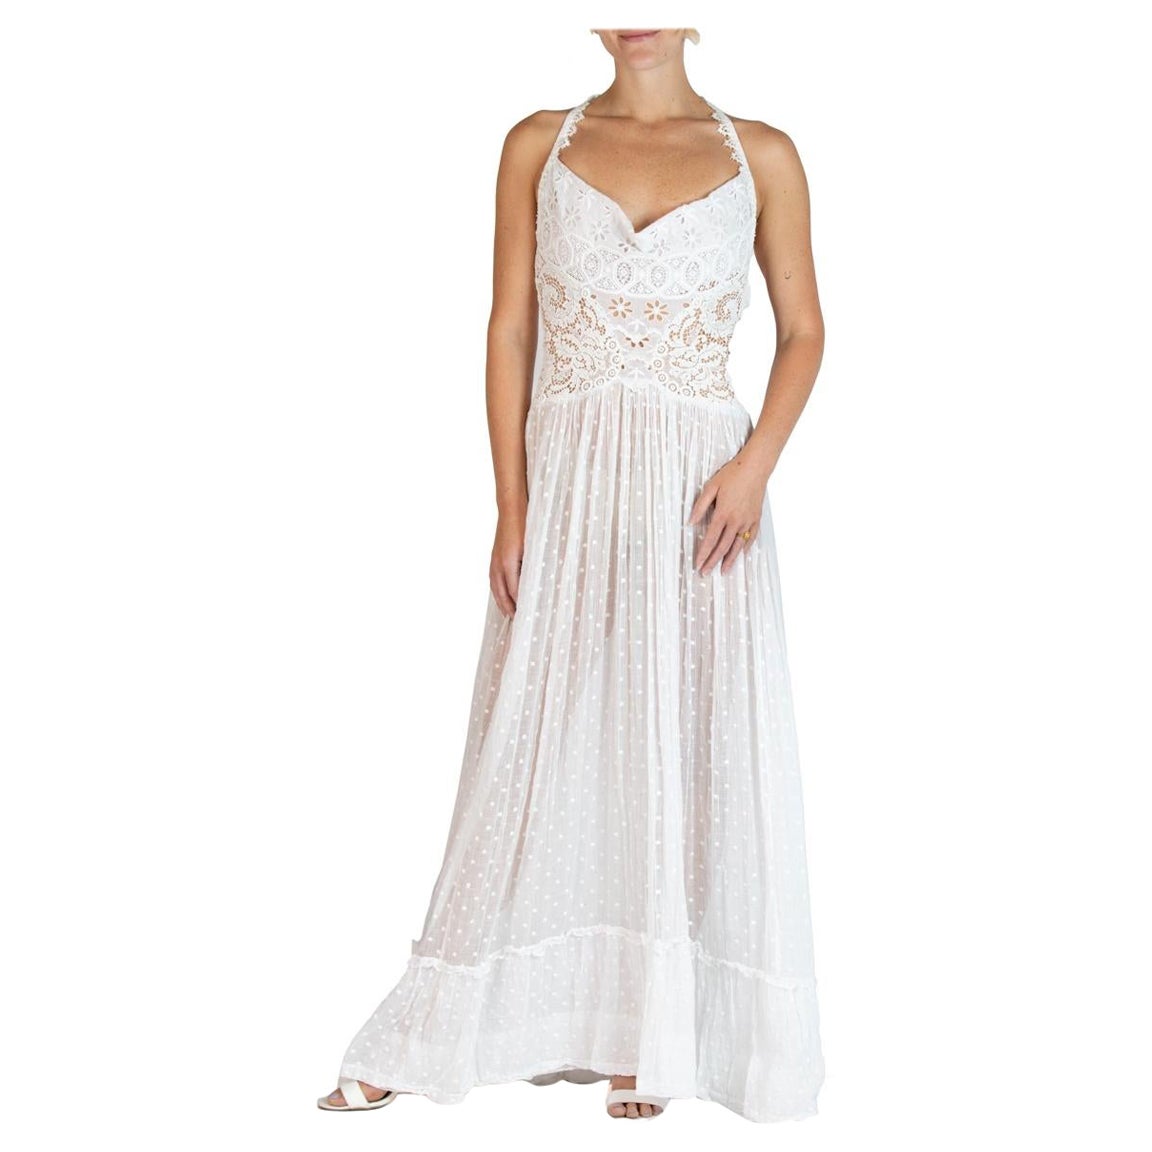 MORPHEW ATELIER White Organic Cotton With Victorian Lace & Dotted Voile Gown For Sale